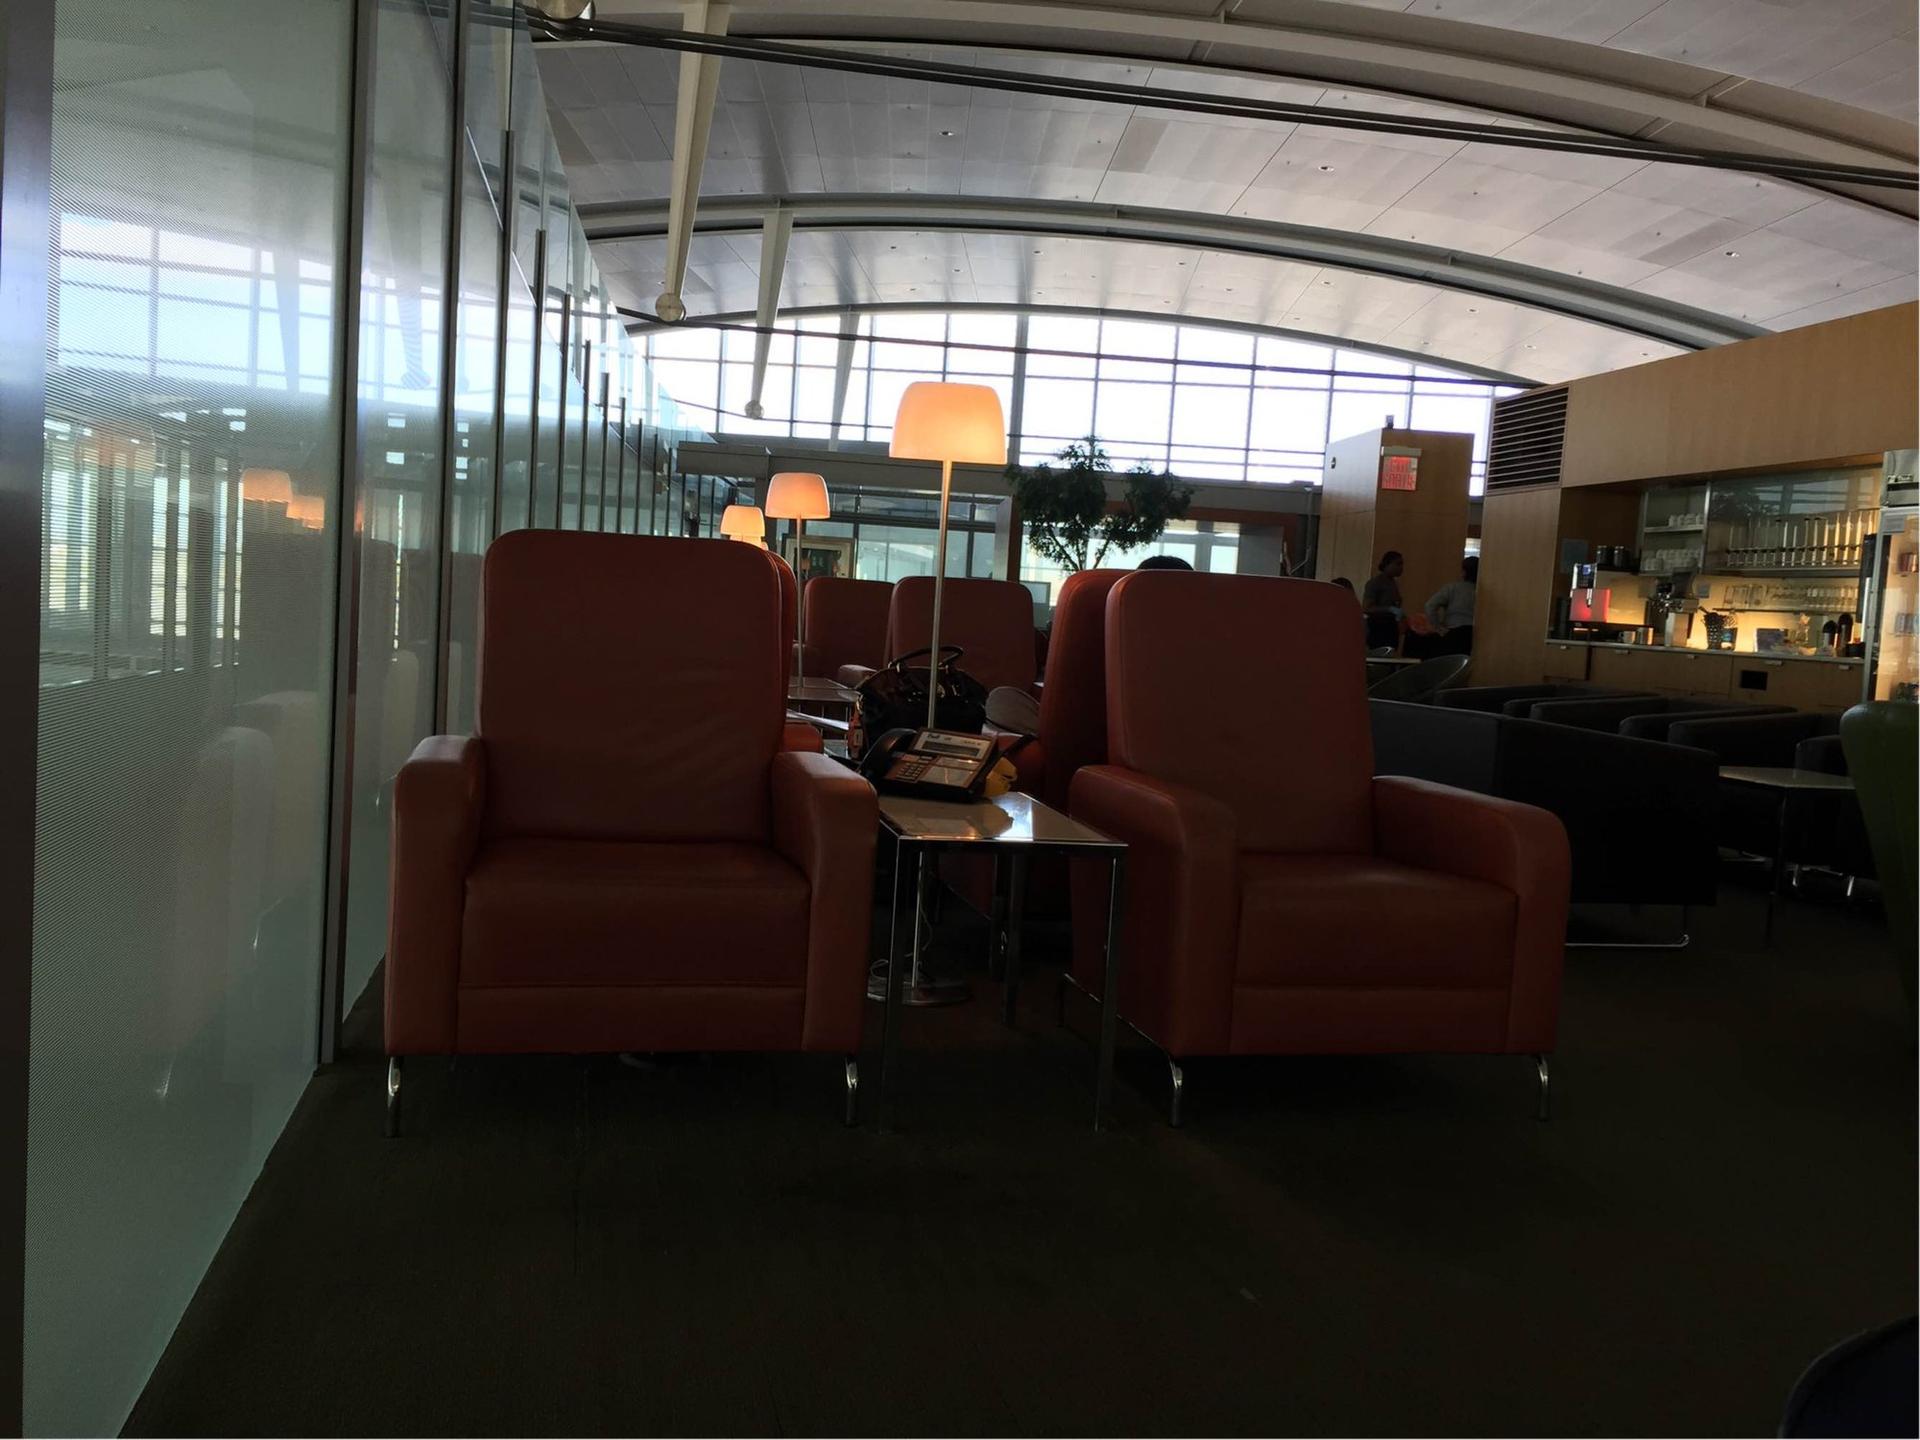 Air Canada Maple Leaf Lounge image 15 of 27